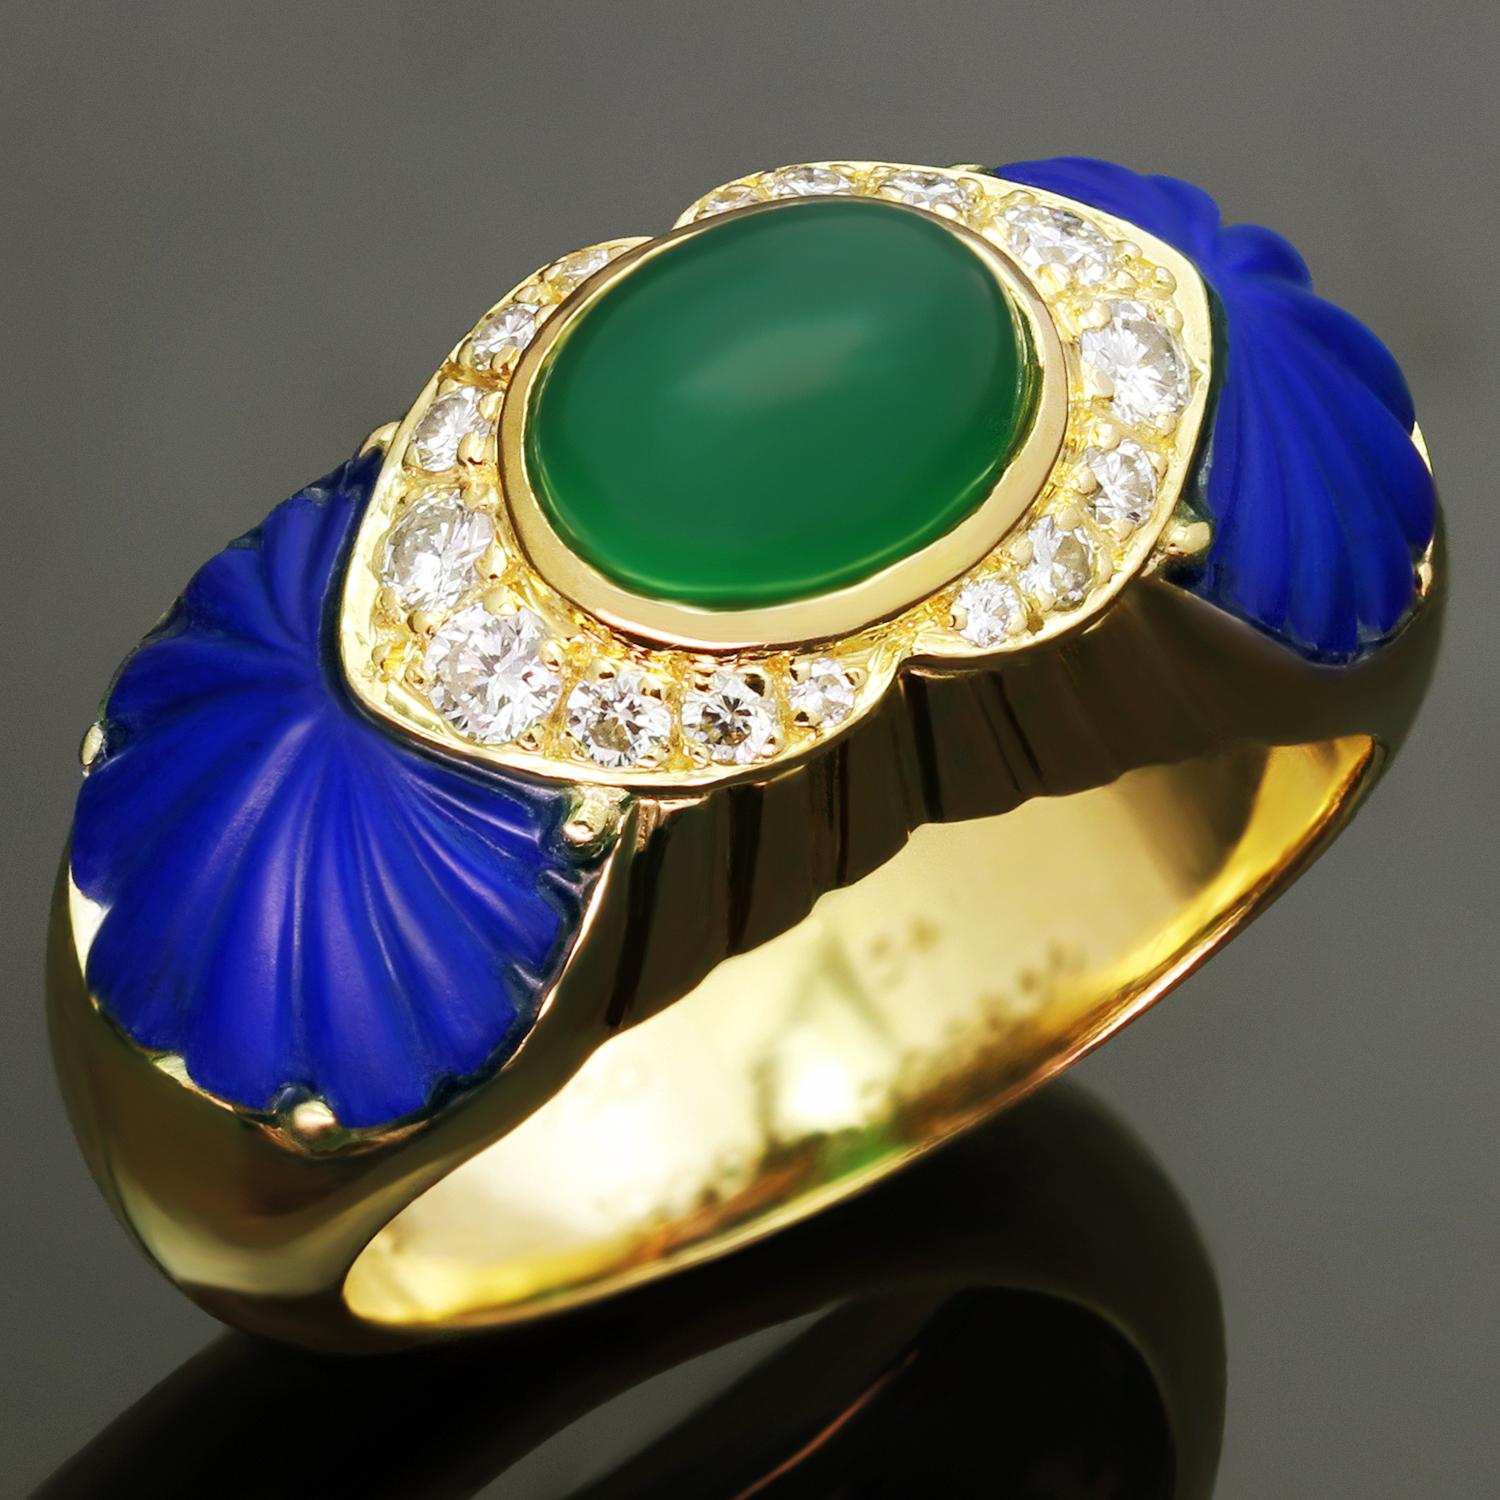 Exotic and alluring, this authentic Cartier ring is crafted in 18k yellow gold and features a stunning oval green rhodochrosite crown encircled by natural brilliant-cut round diamonds flanked by beautifully carved blue lapis lazuli fans. Made in